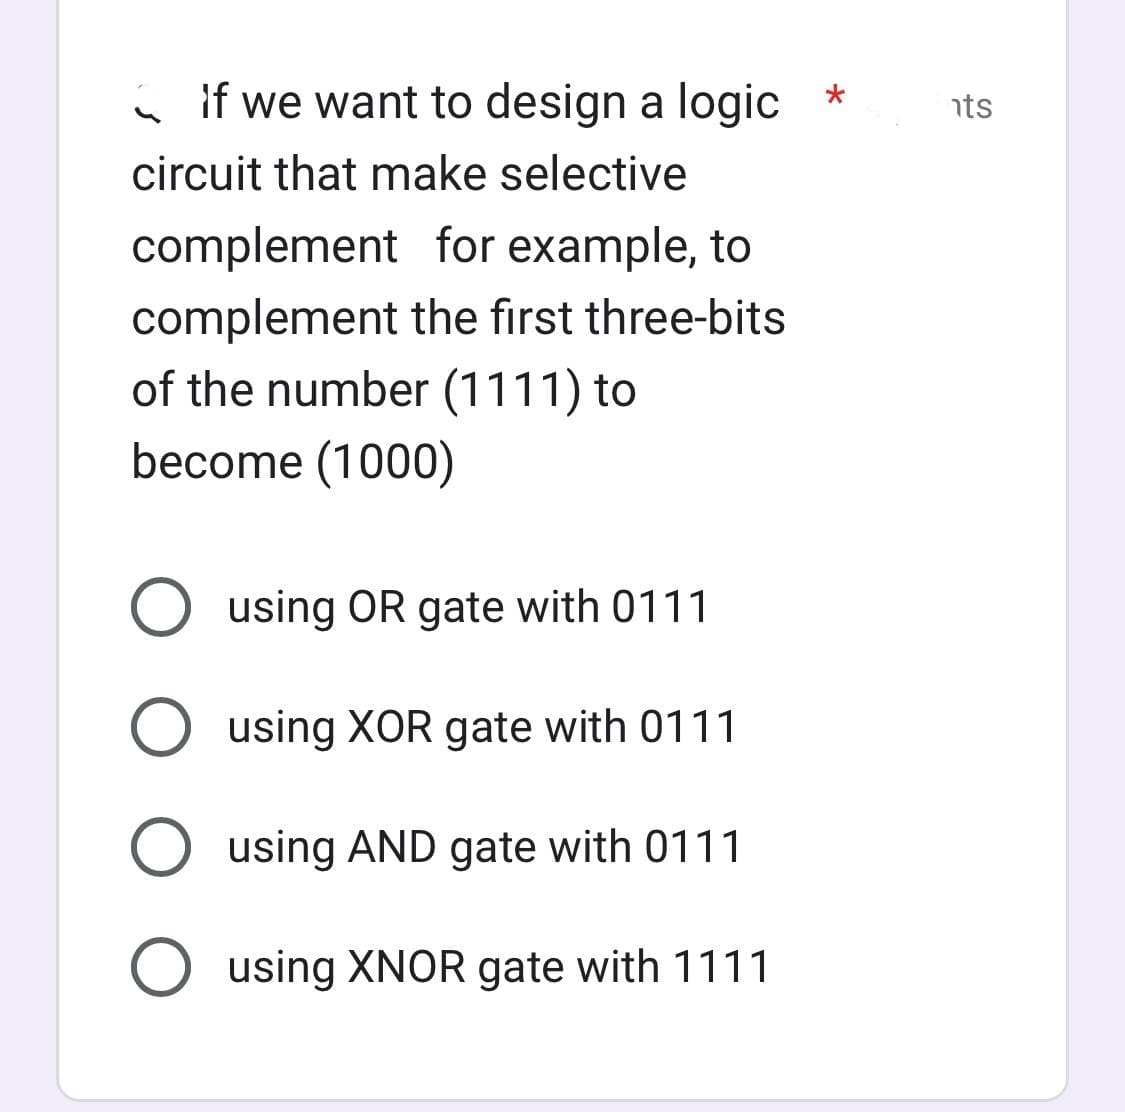 if we want to design a logic *
circuit that make selective
complement for example, to
complement the first three-bits
of the number (1111) to
become (1000)
O using OR gate with 0111
O using XOR gate with 0111
O using AND gate with 0111
O using XNOR gate with 1111
nts